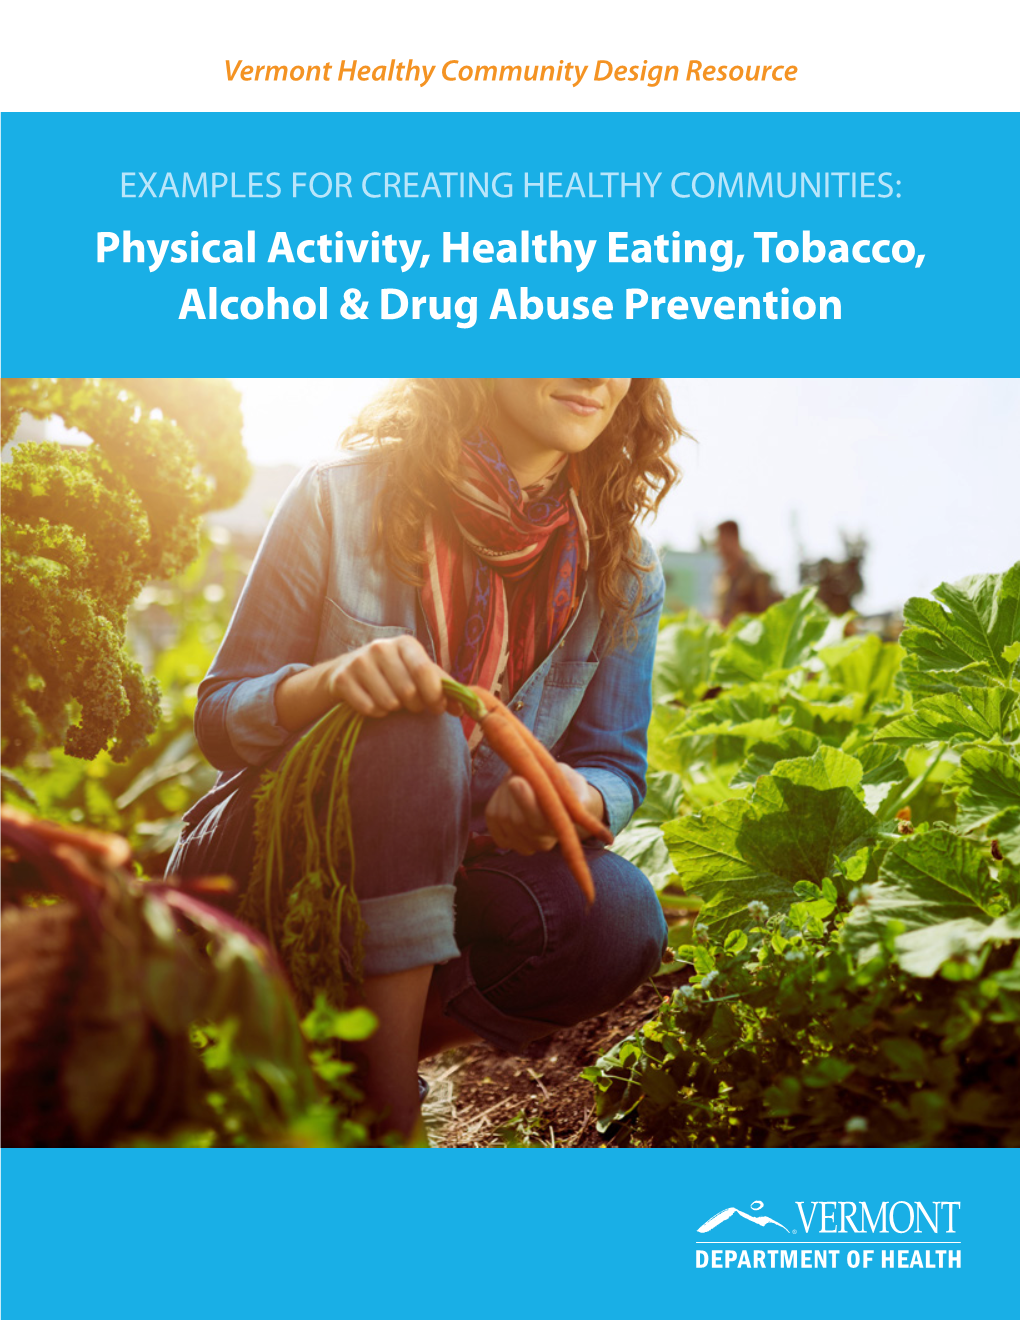 Physical Activity, Healthy Eating, Tobacco, Alcohol & Drug Abuse Prevention